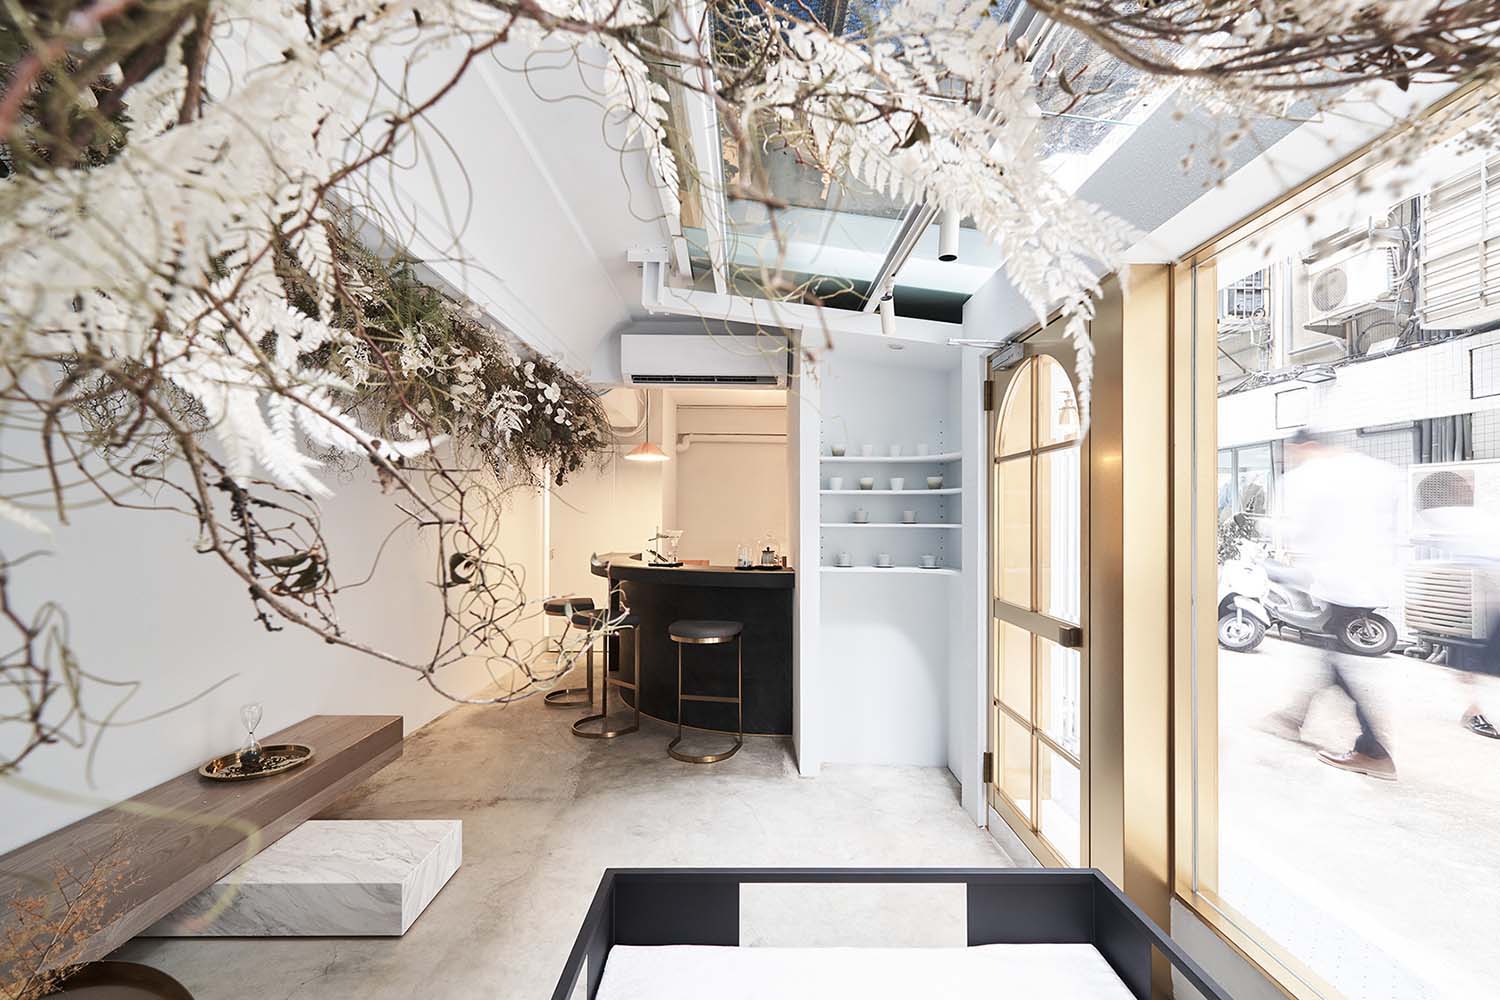 Dry Salon Commercial Space by Tim Chen, Winner in Interior Space and Exhibition Design Category, 2019—2020.